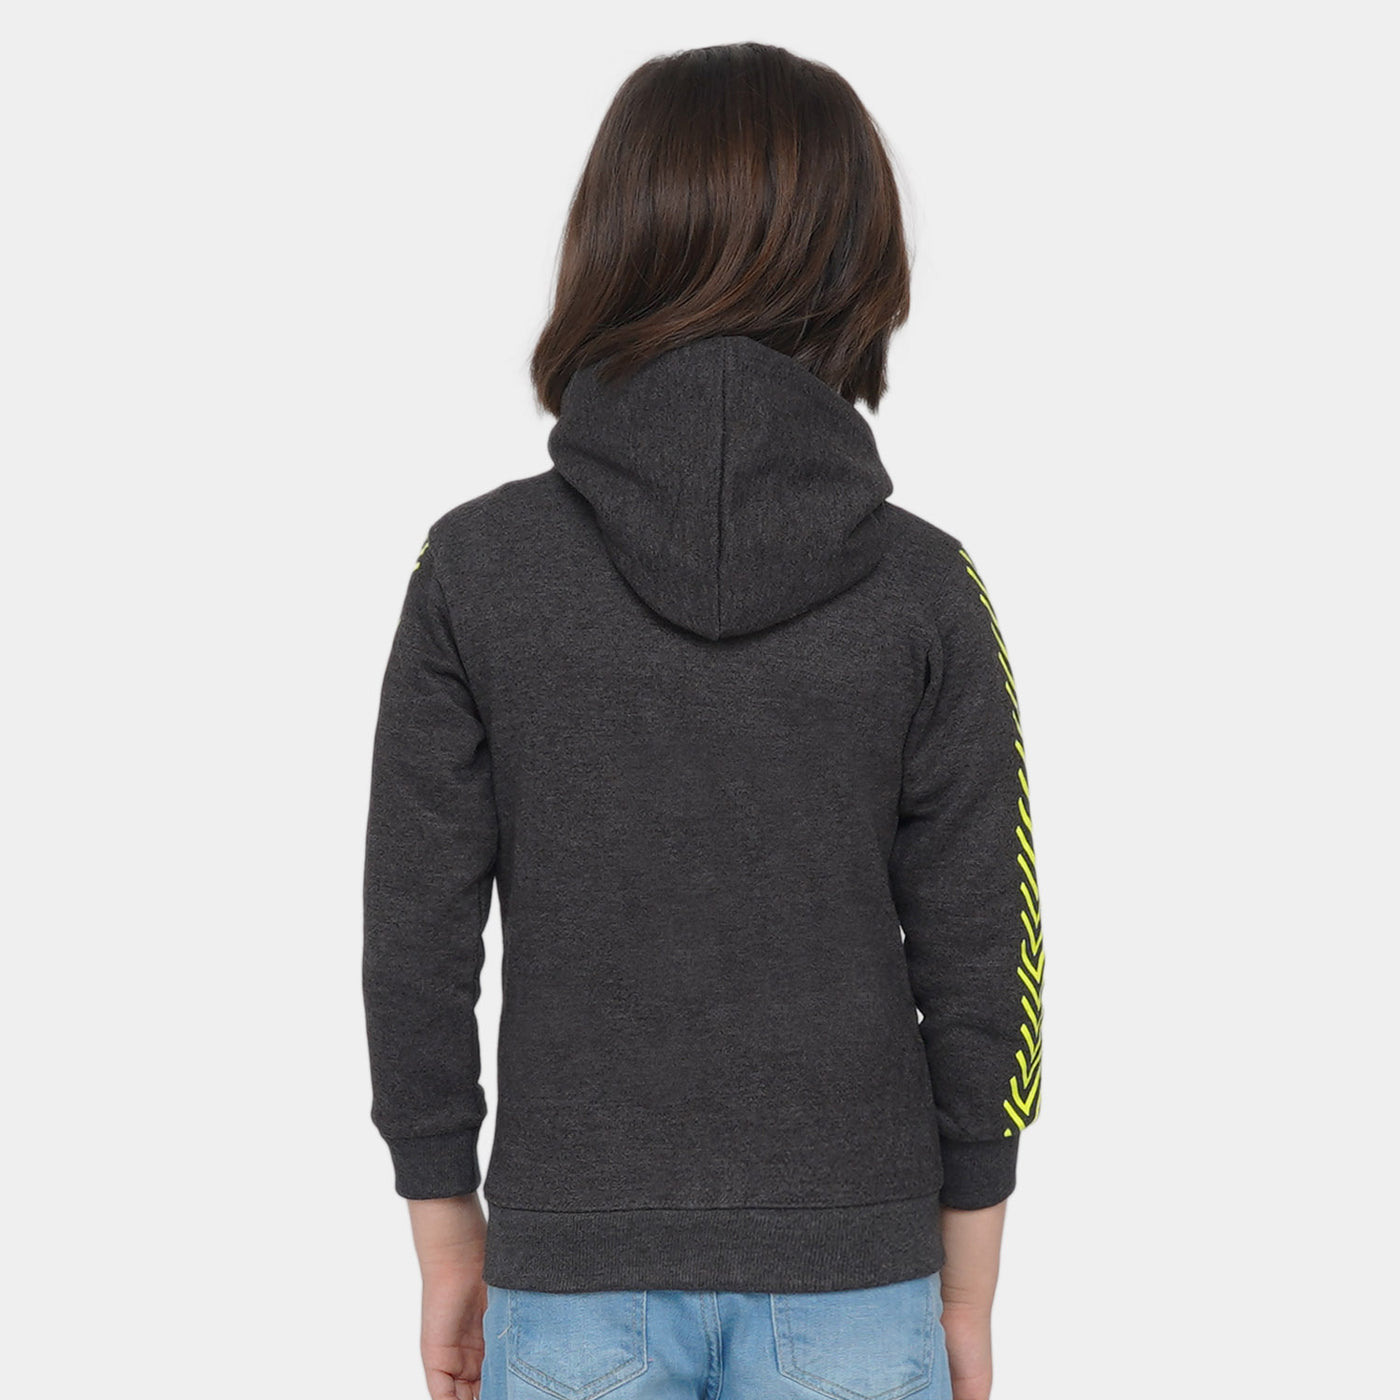 Boys Hooded Knitted Jacket Reflective - CHARCOAL